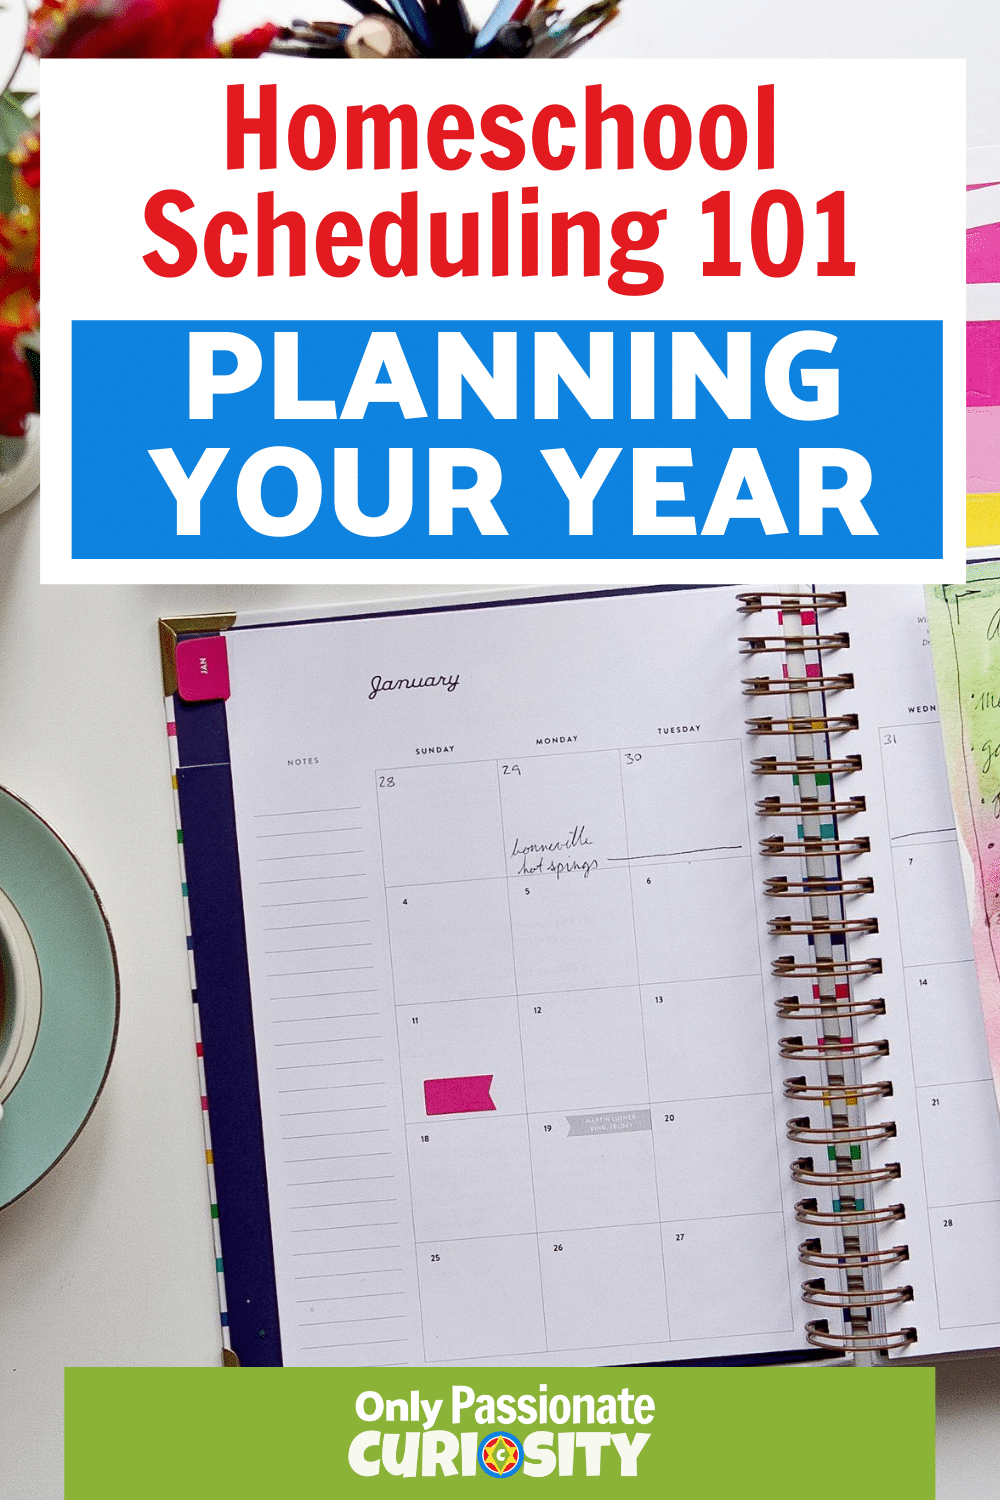 Homeschool Scheduling 101, is designed to help you get your scheduling done quickly and efficiently--so you can plan your year ahead. #Homeschool #Timemanagement #Planning